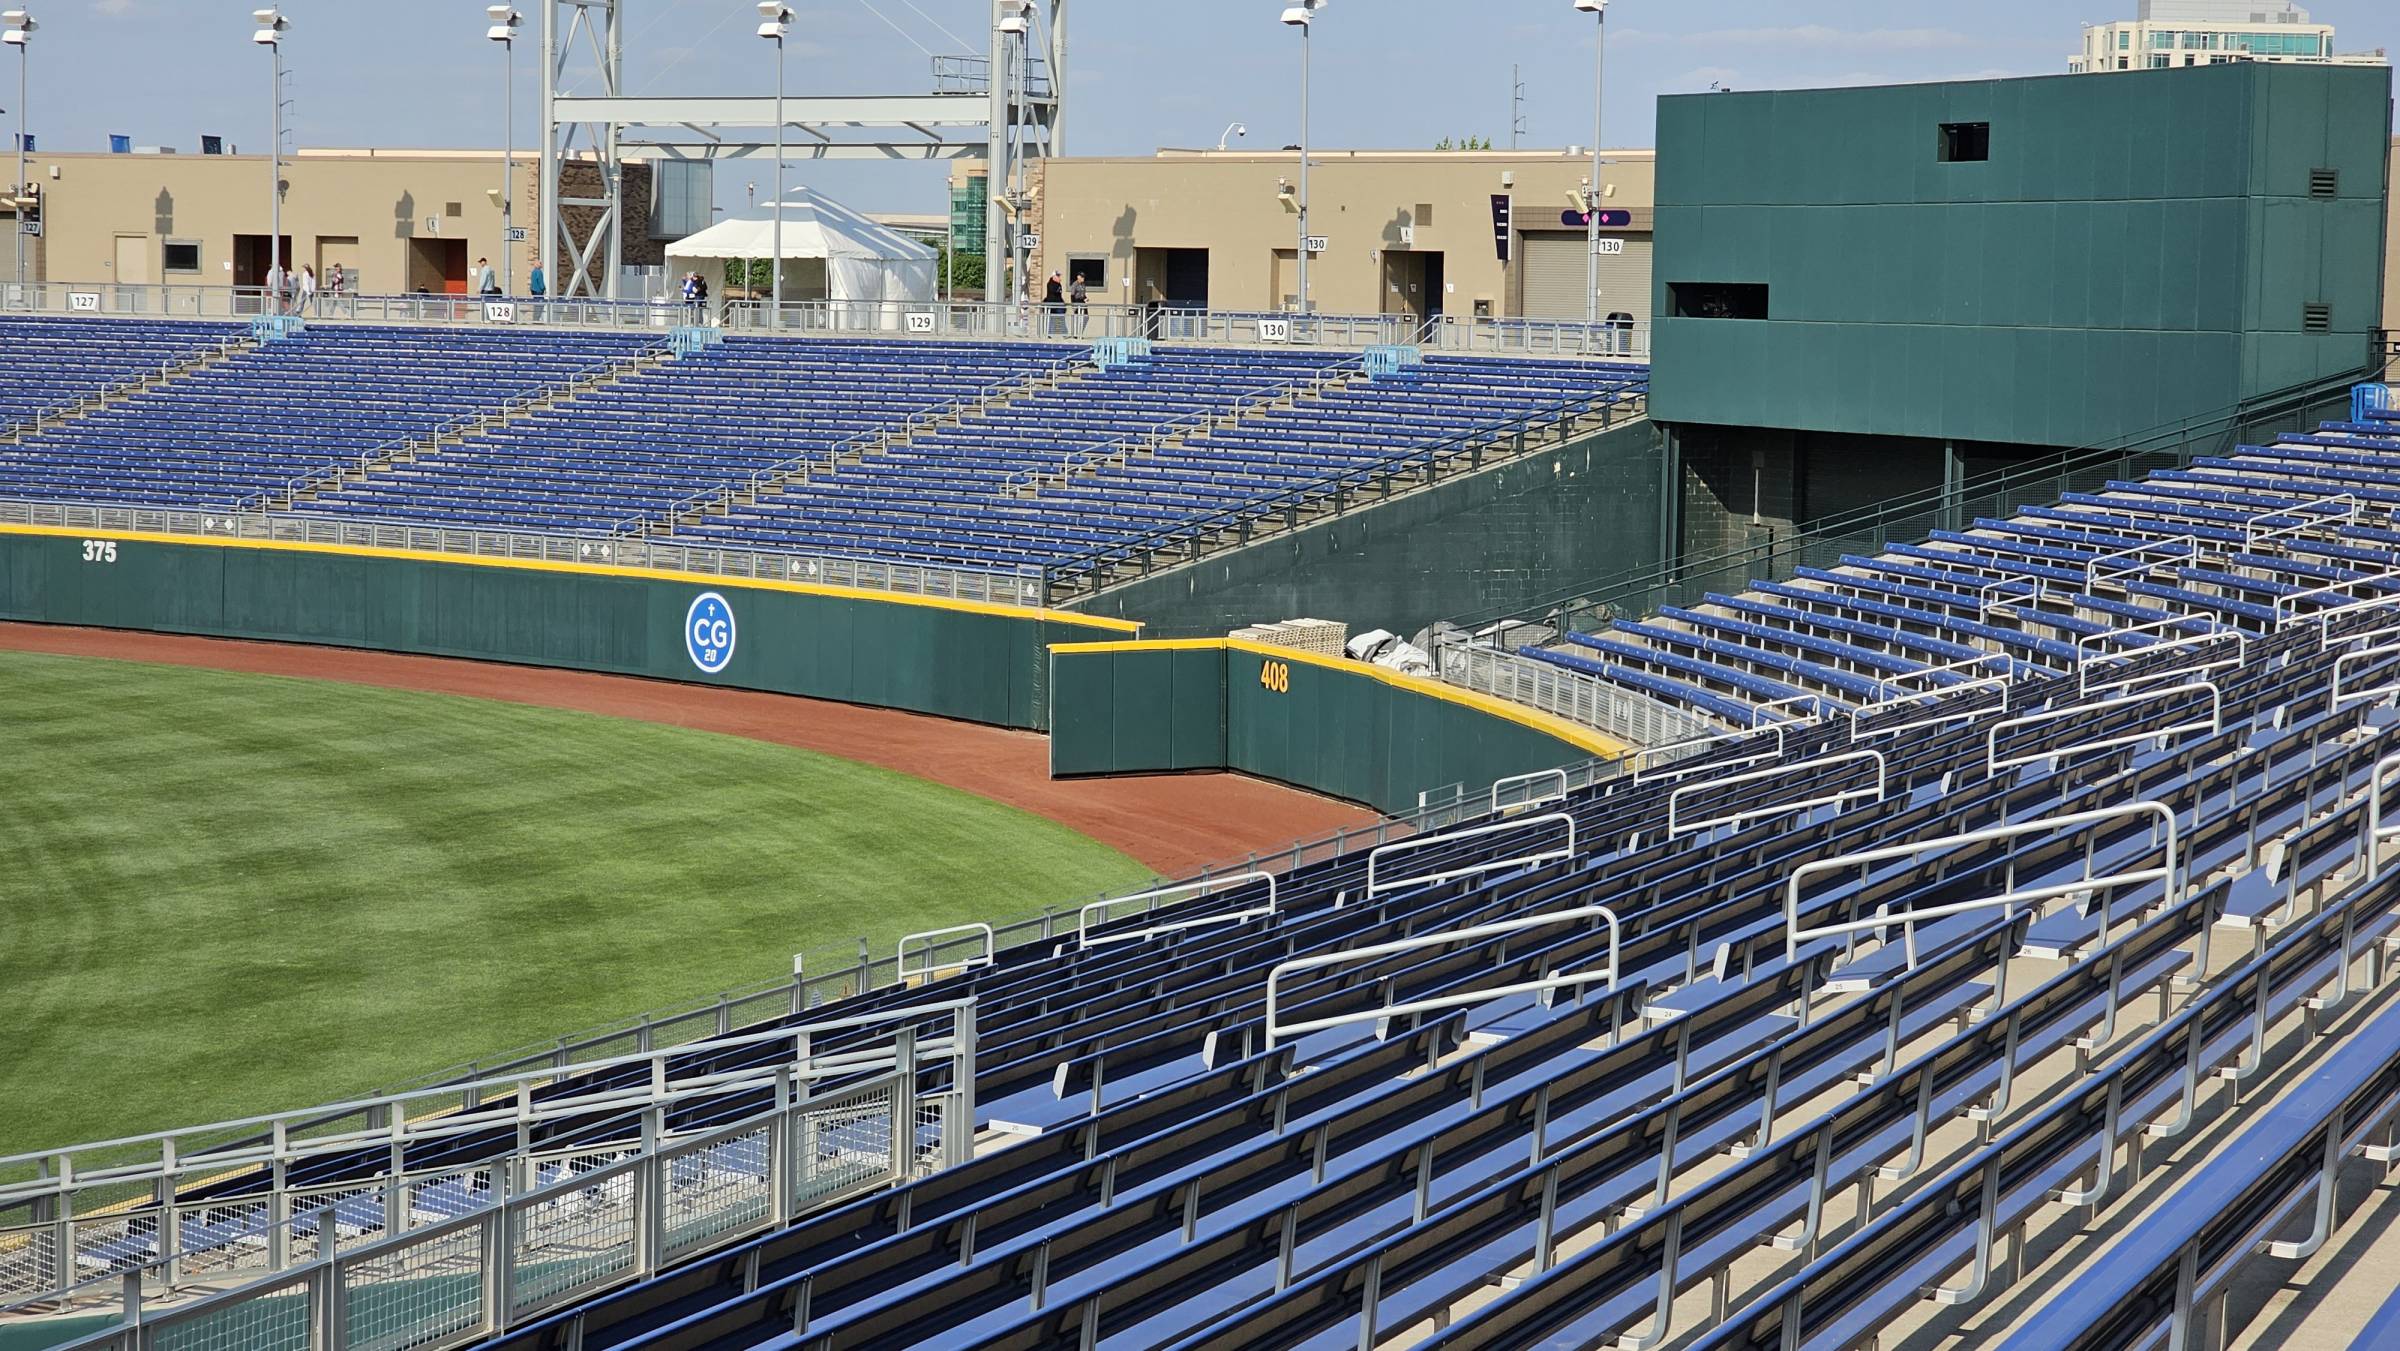 Outfield bleacher seating at Charles Schwab Field